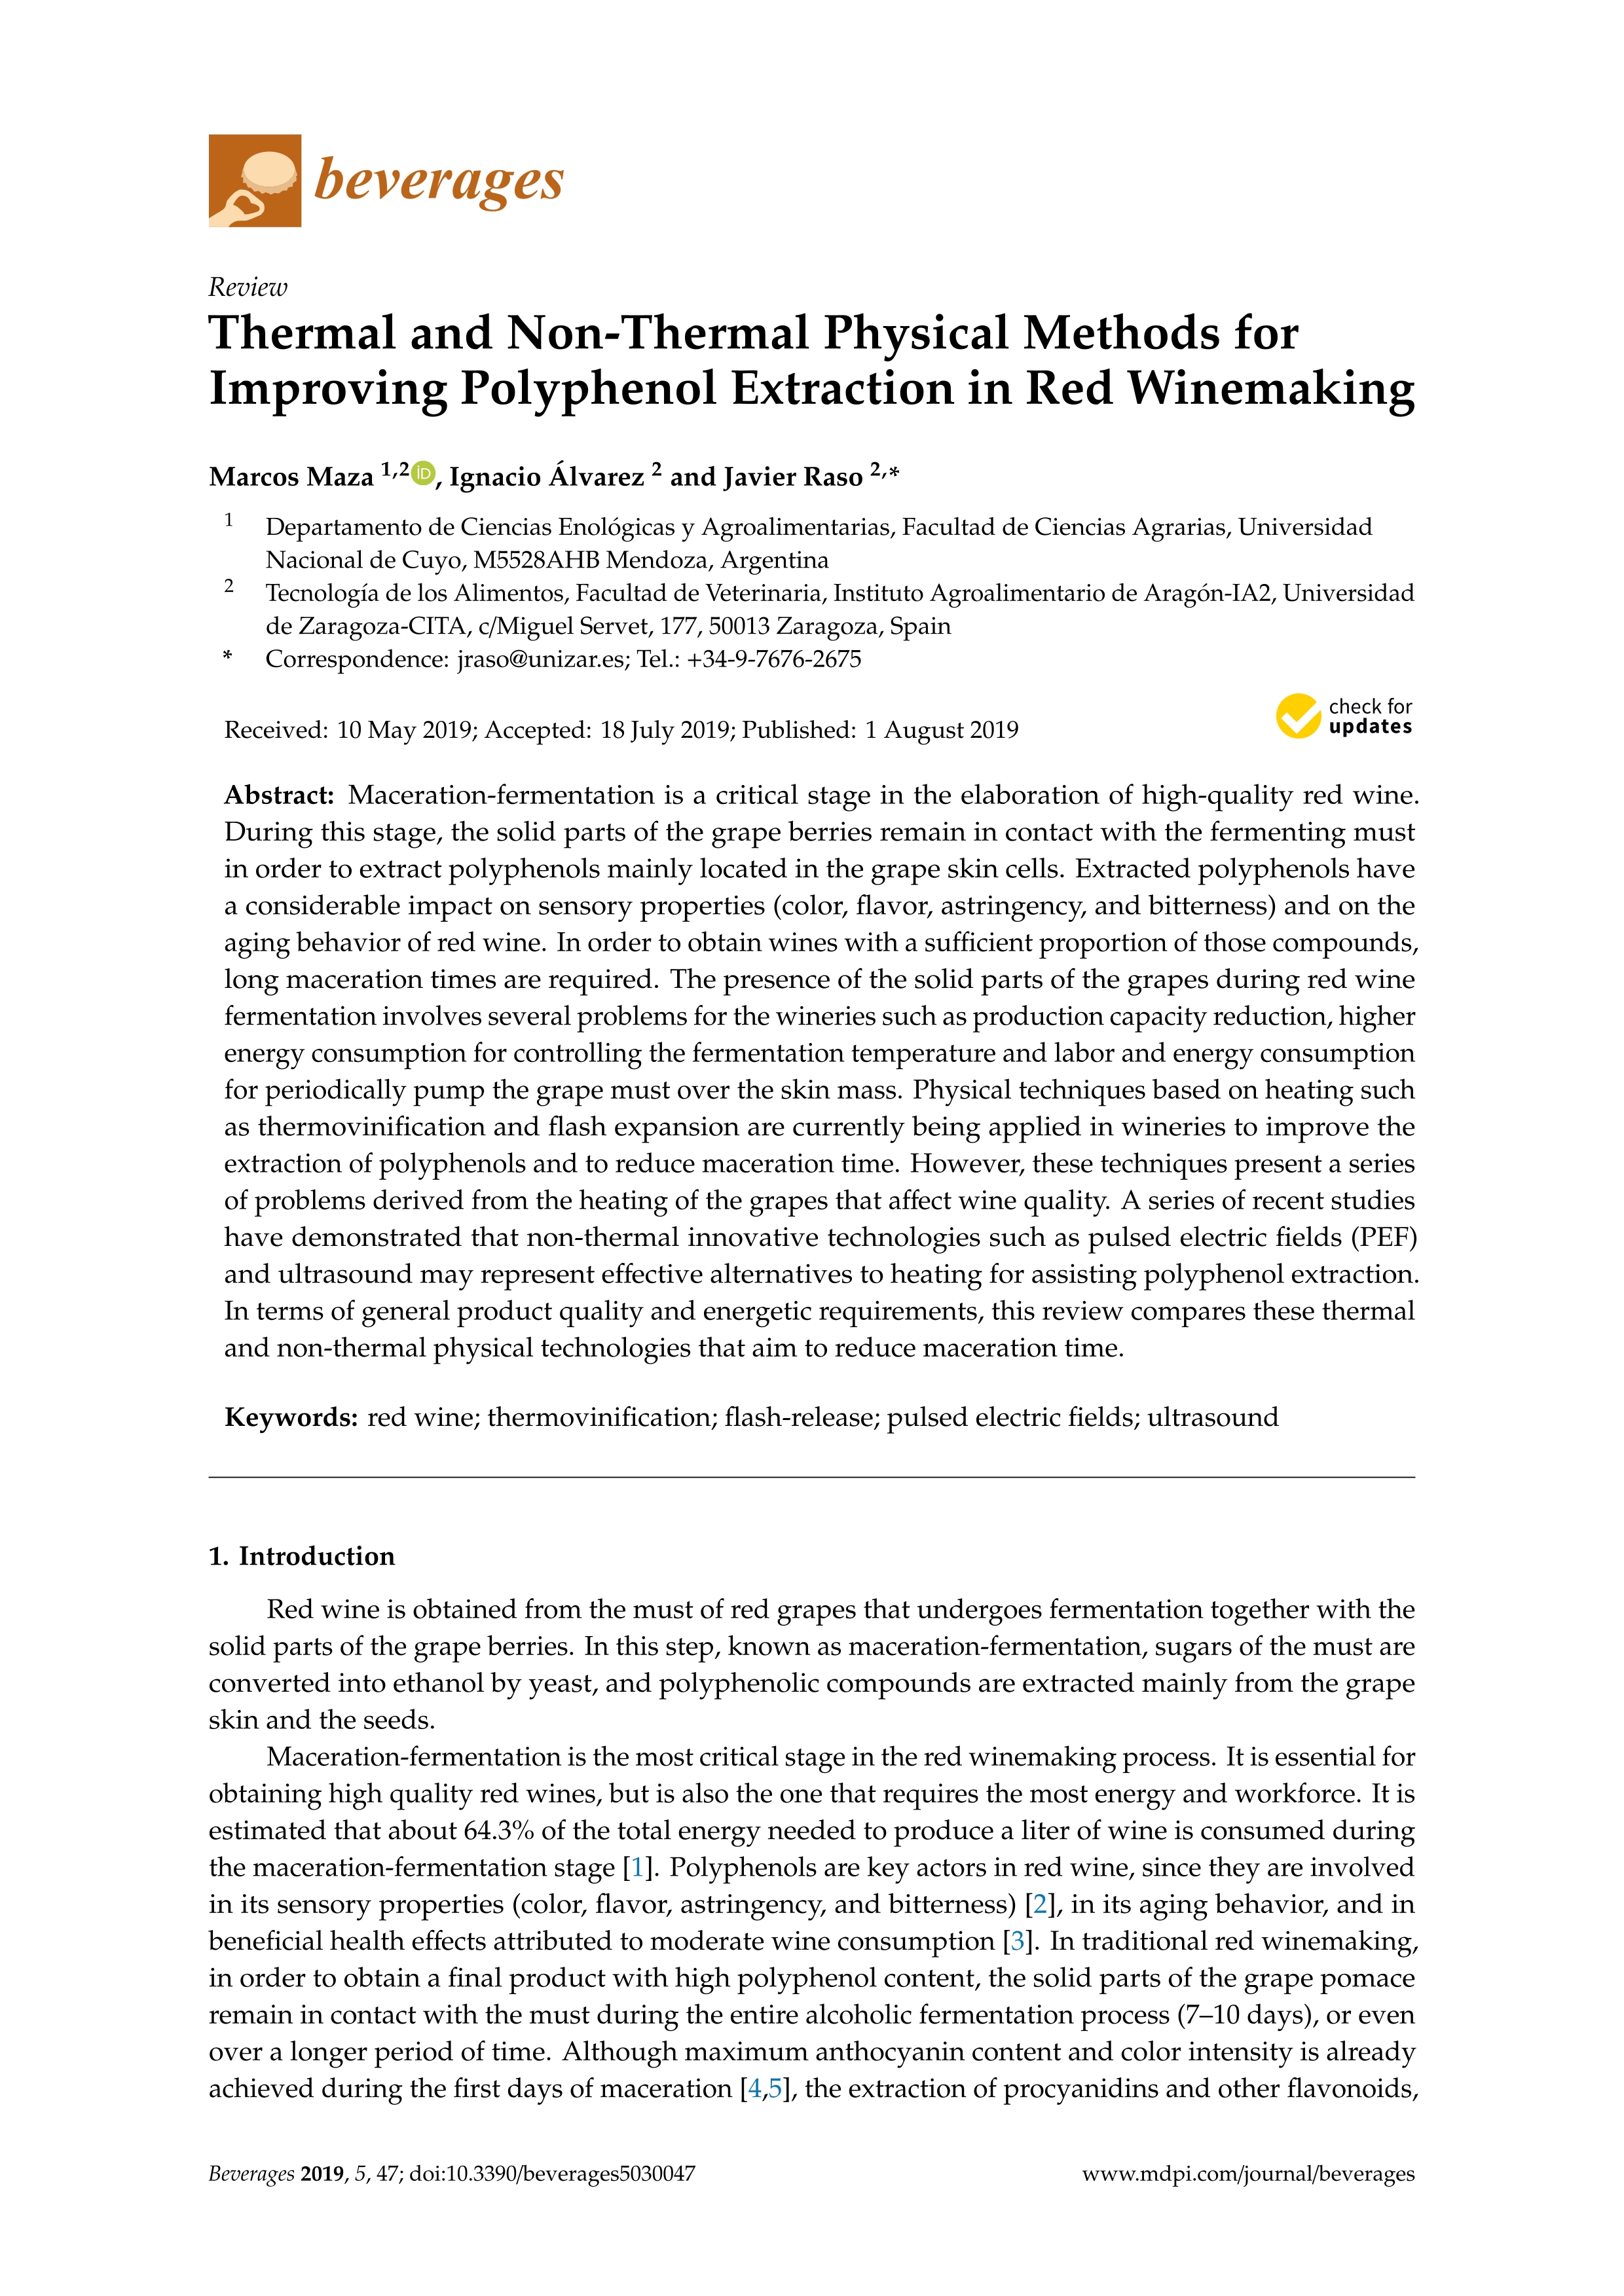 Thermal and Non-Thermal Physical Methods for Improving Polyphenol Extraction in Red Winemaking